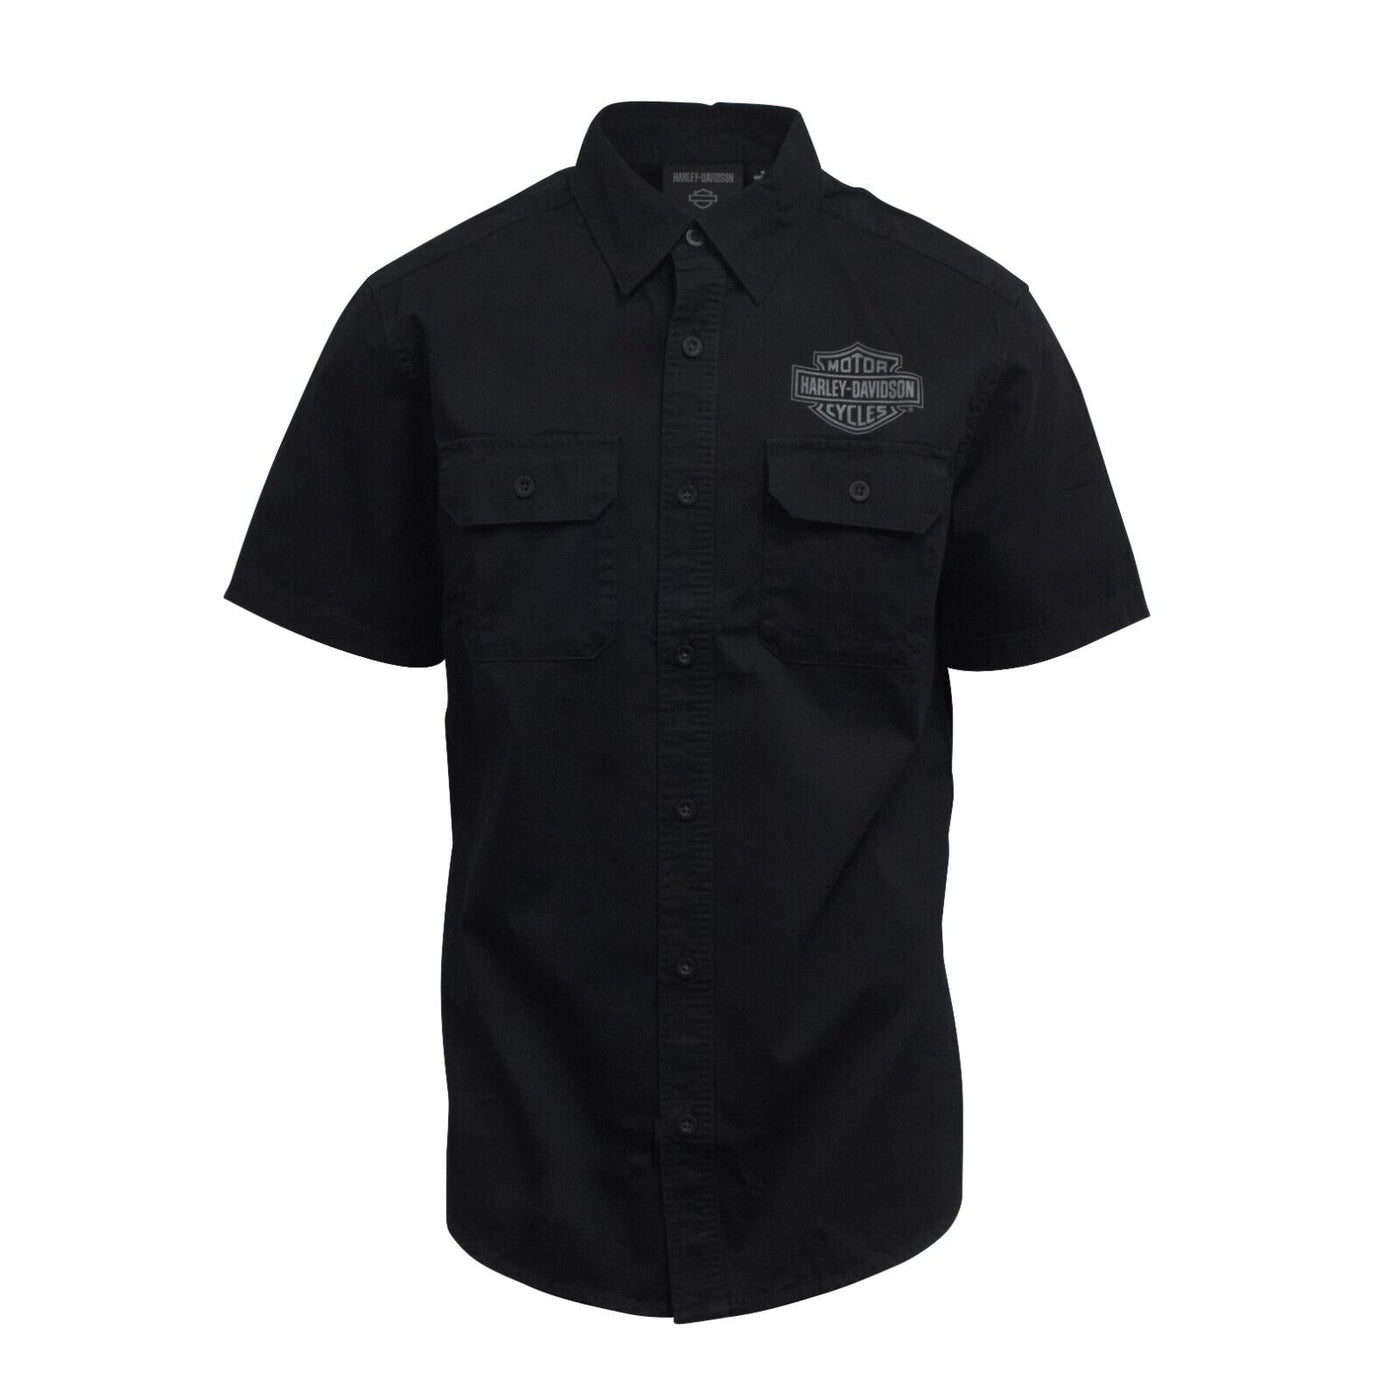 Harley-Davidson Men's Black Wounded Warrior Project S/S Woven Shirt (S51)